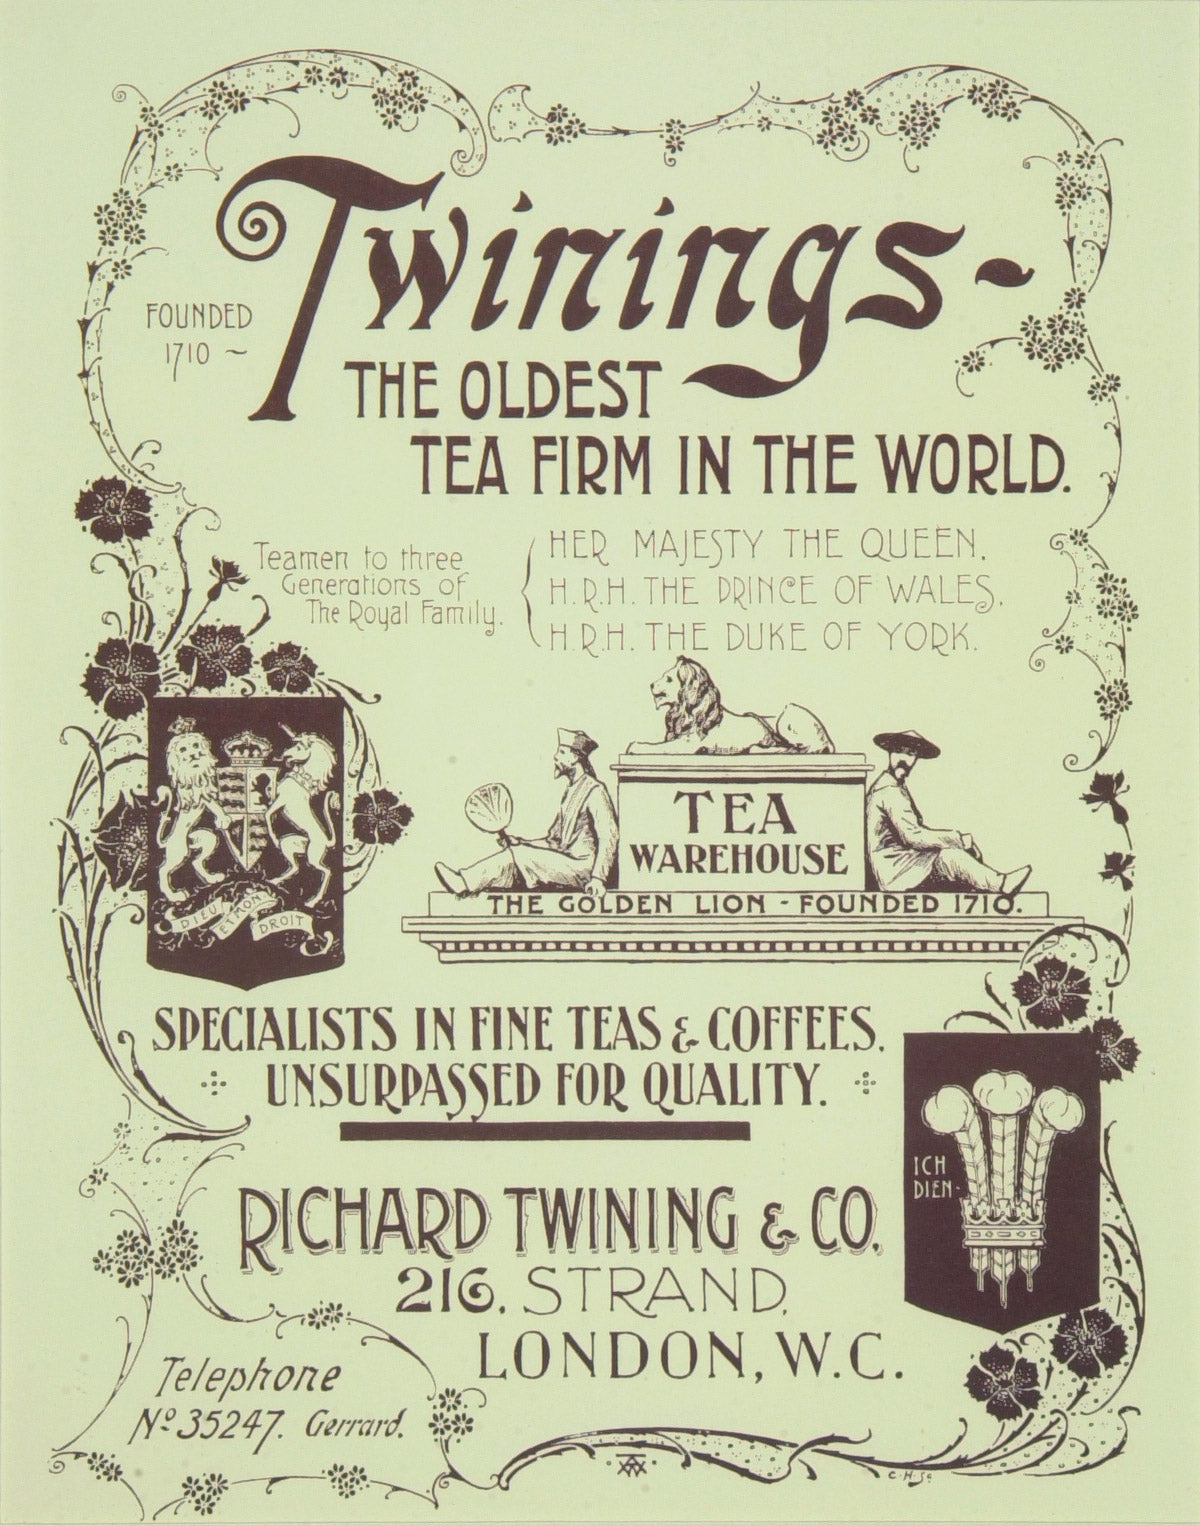 Learn More About the Ethos Behind Twinings